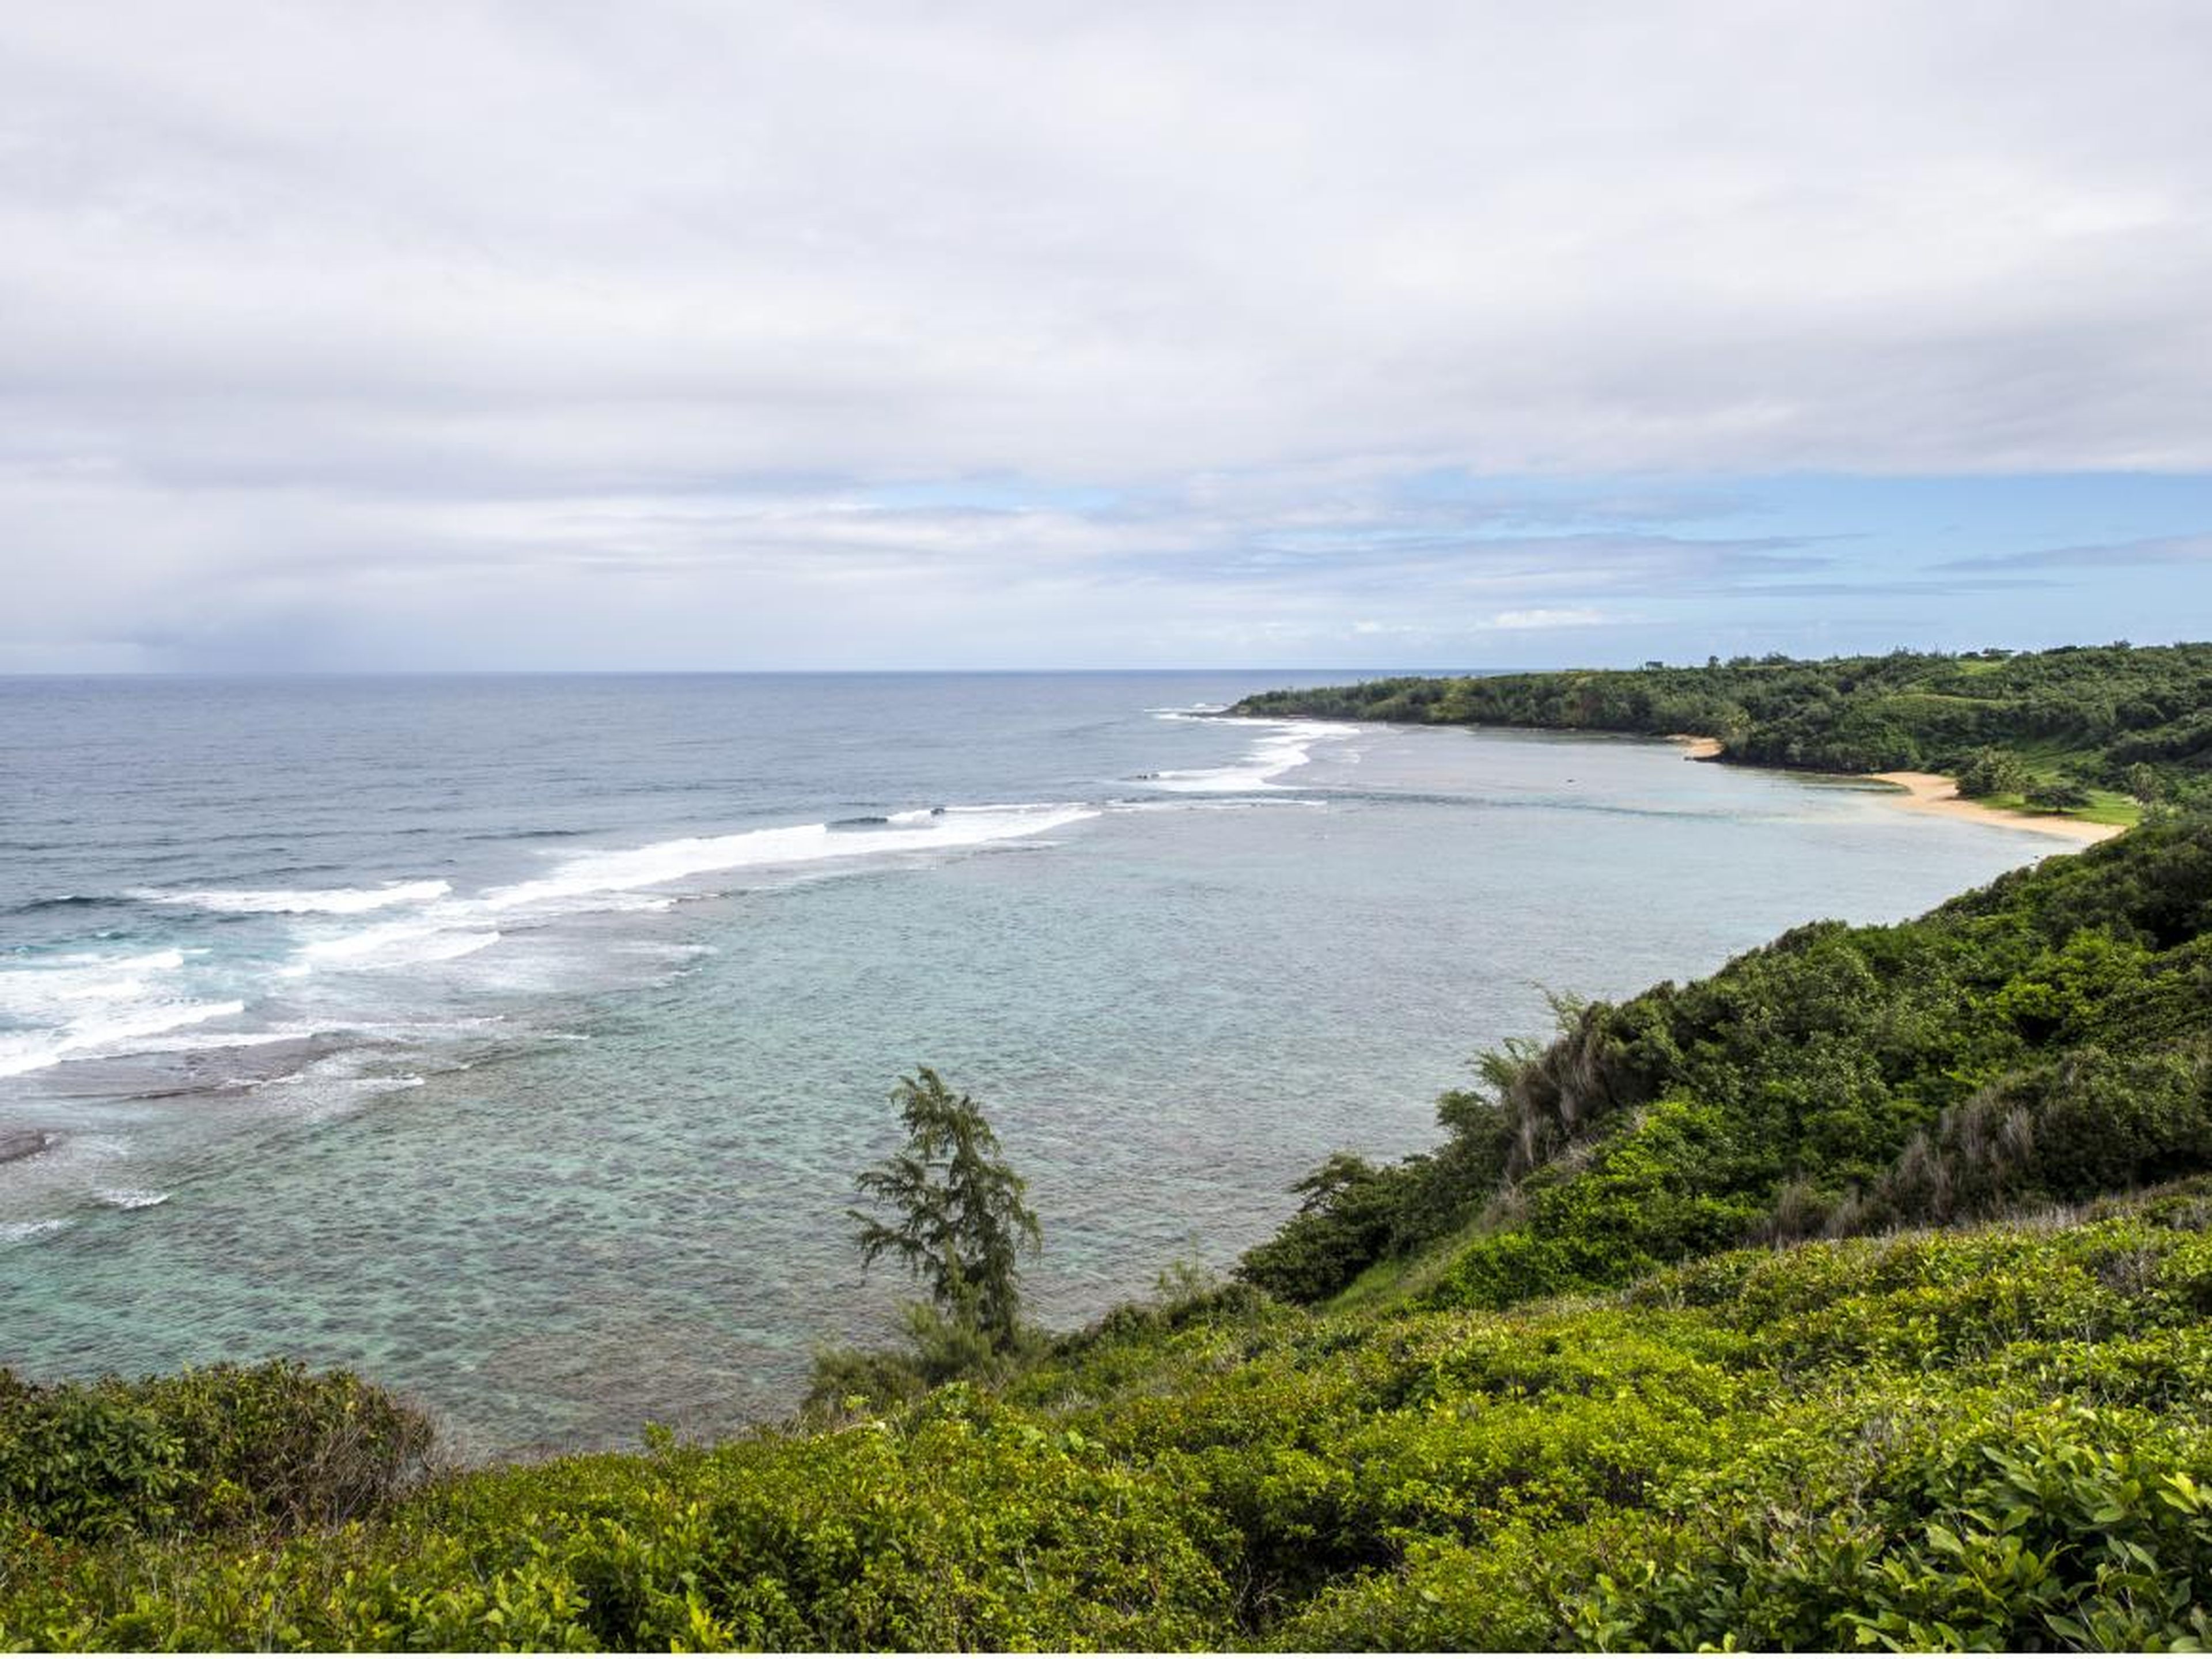 The beach is difficult to access, with a half-mile trail that leads down to the shore. The beach is open to the public, and the piece of land that Zuckerberg purchased is situated a bit further back from the shoreline.